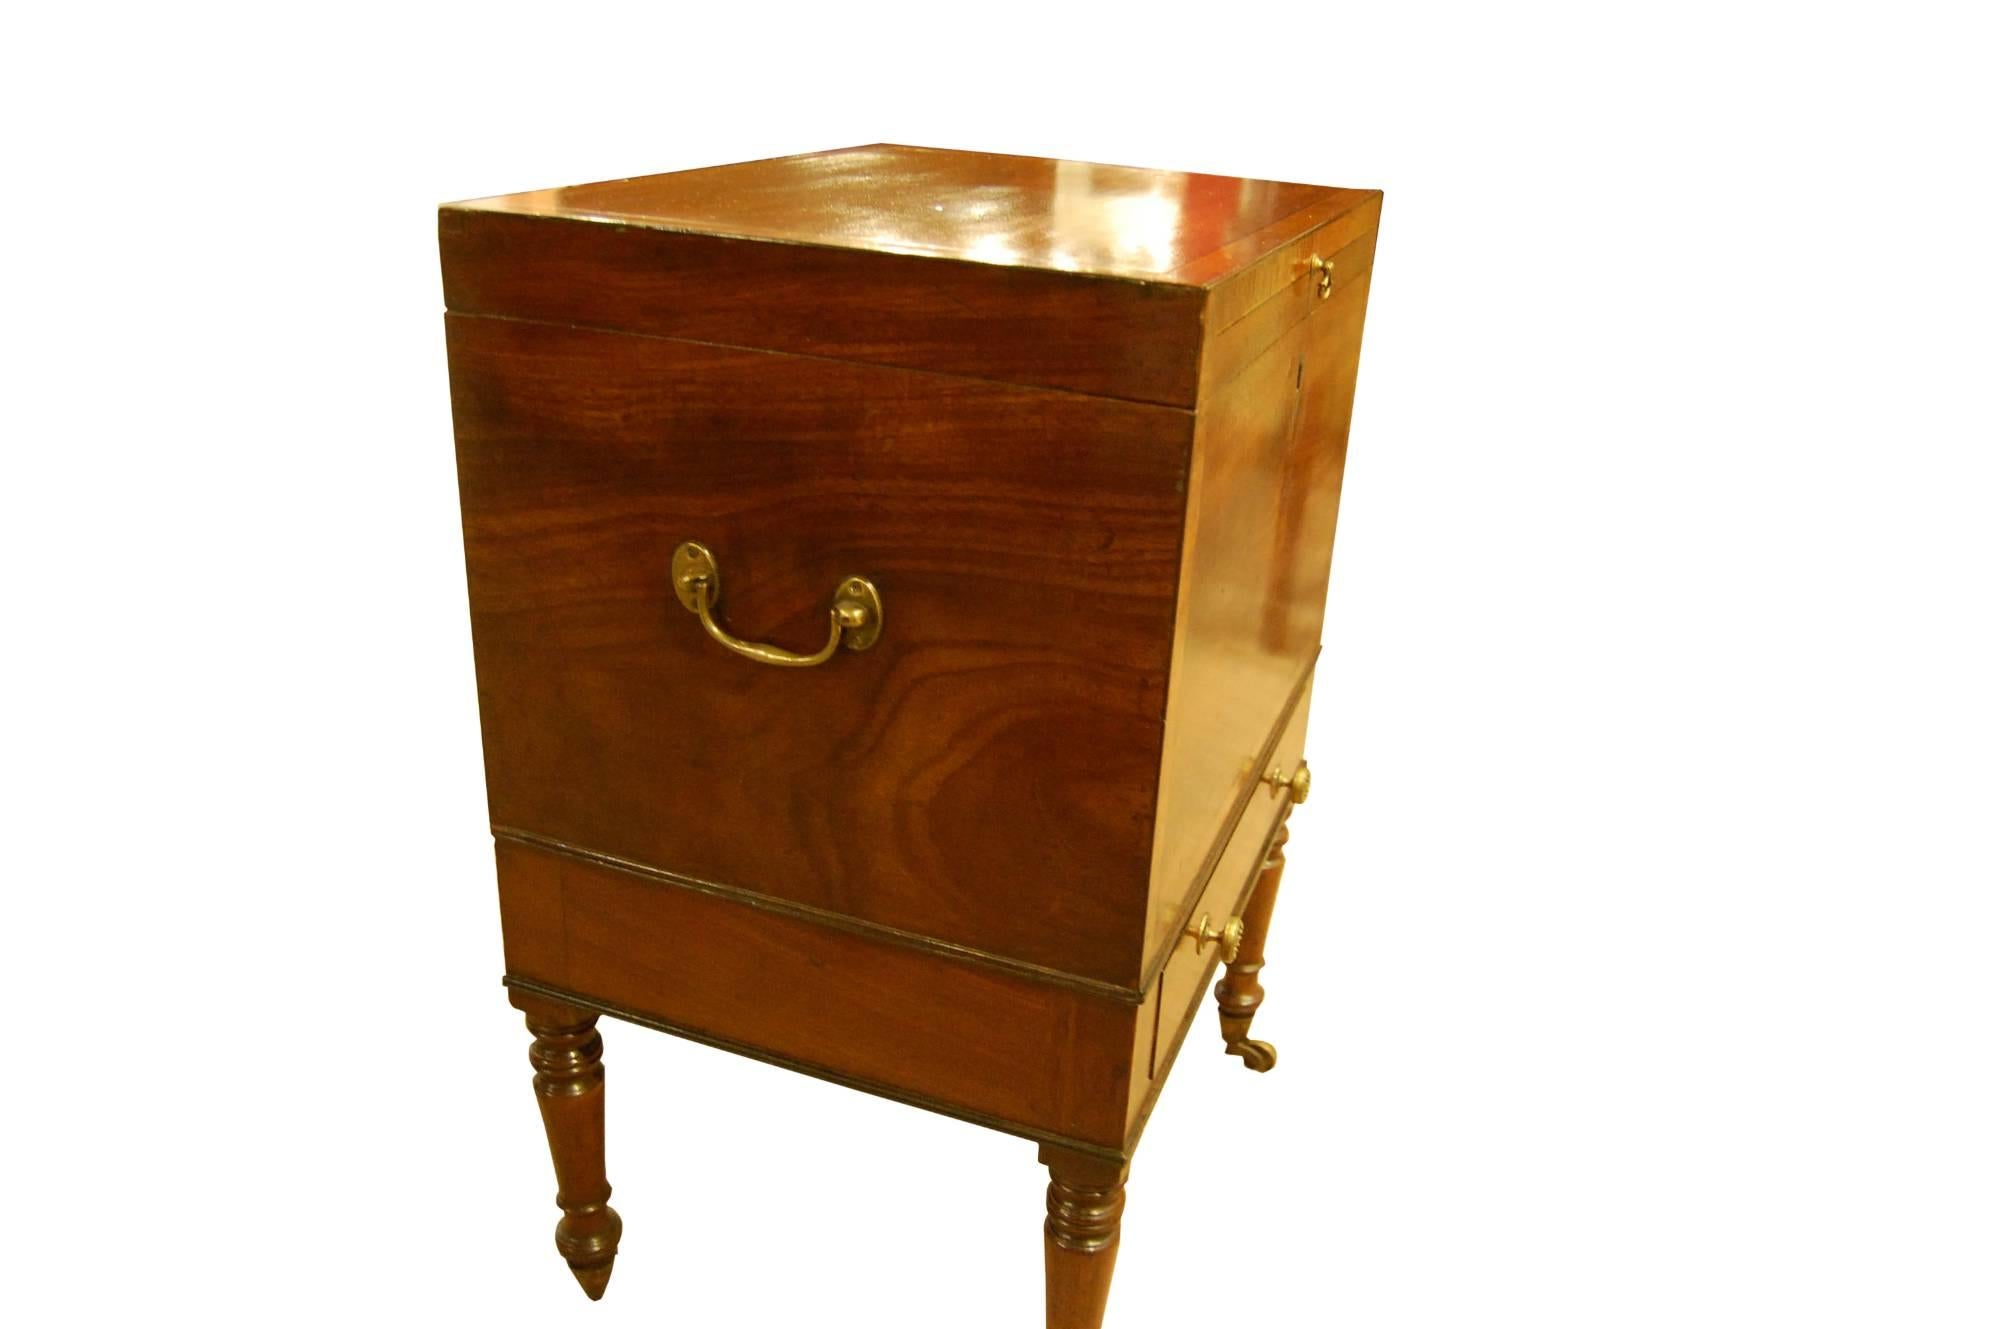 Regency mahogany teapoy or decanter box on a stand crossbanded in tulipwood,

The interior has single remaining tinned caddy, tinned hot tray, and a single drawer below,

circa 1810.
 